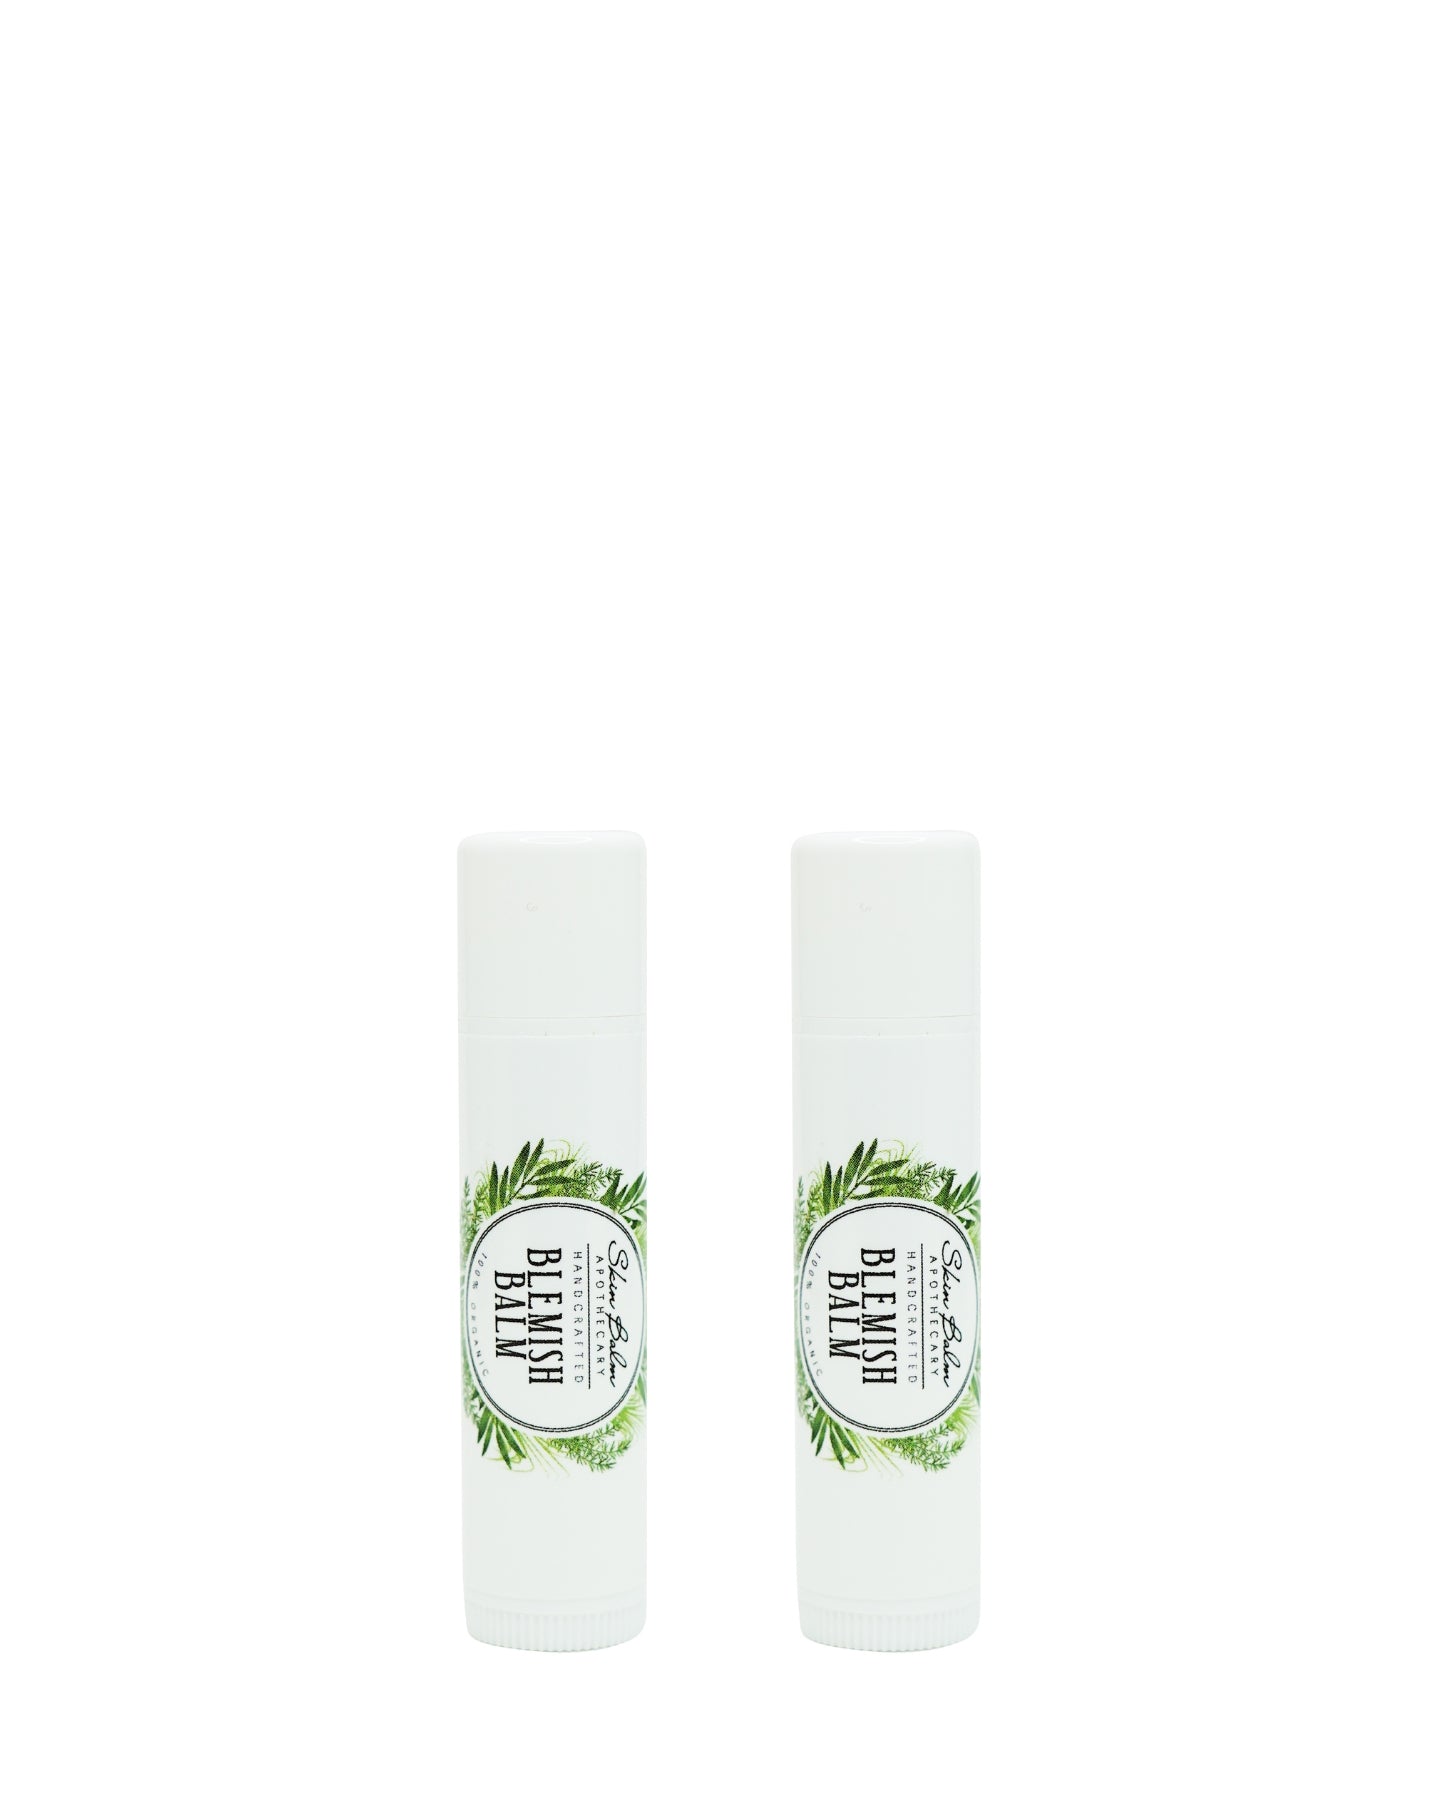 Blemish Balm Duo against a white background.